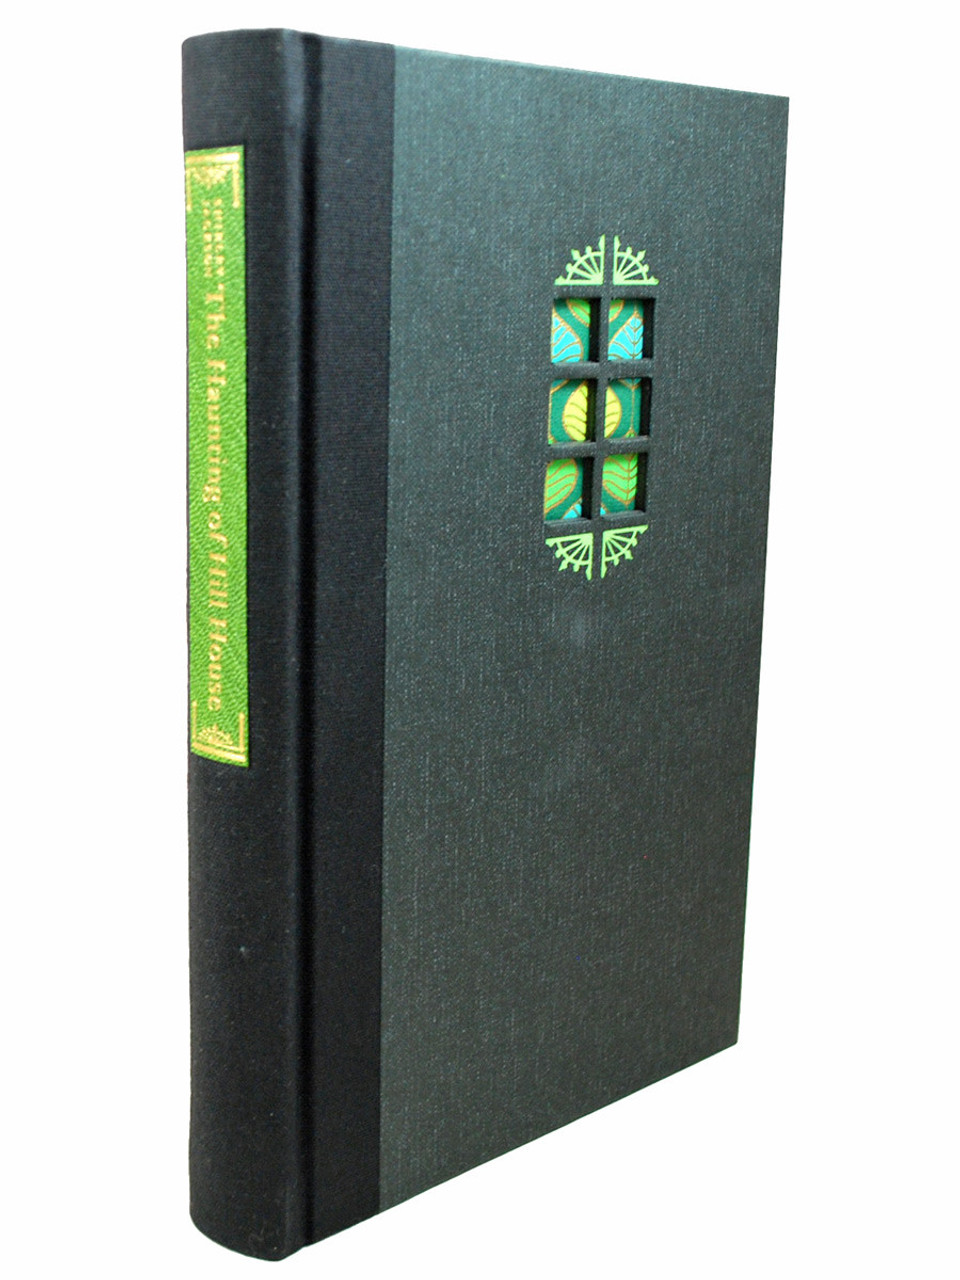 Shirley Jackson "The Haunting of Hill House" Signed Limited Edition No. 47 of 185 [Very Fine]